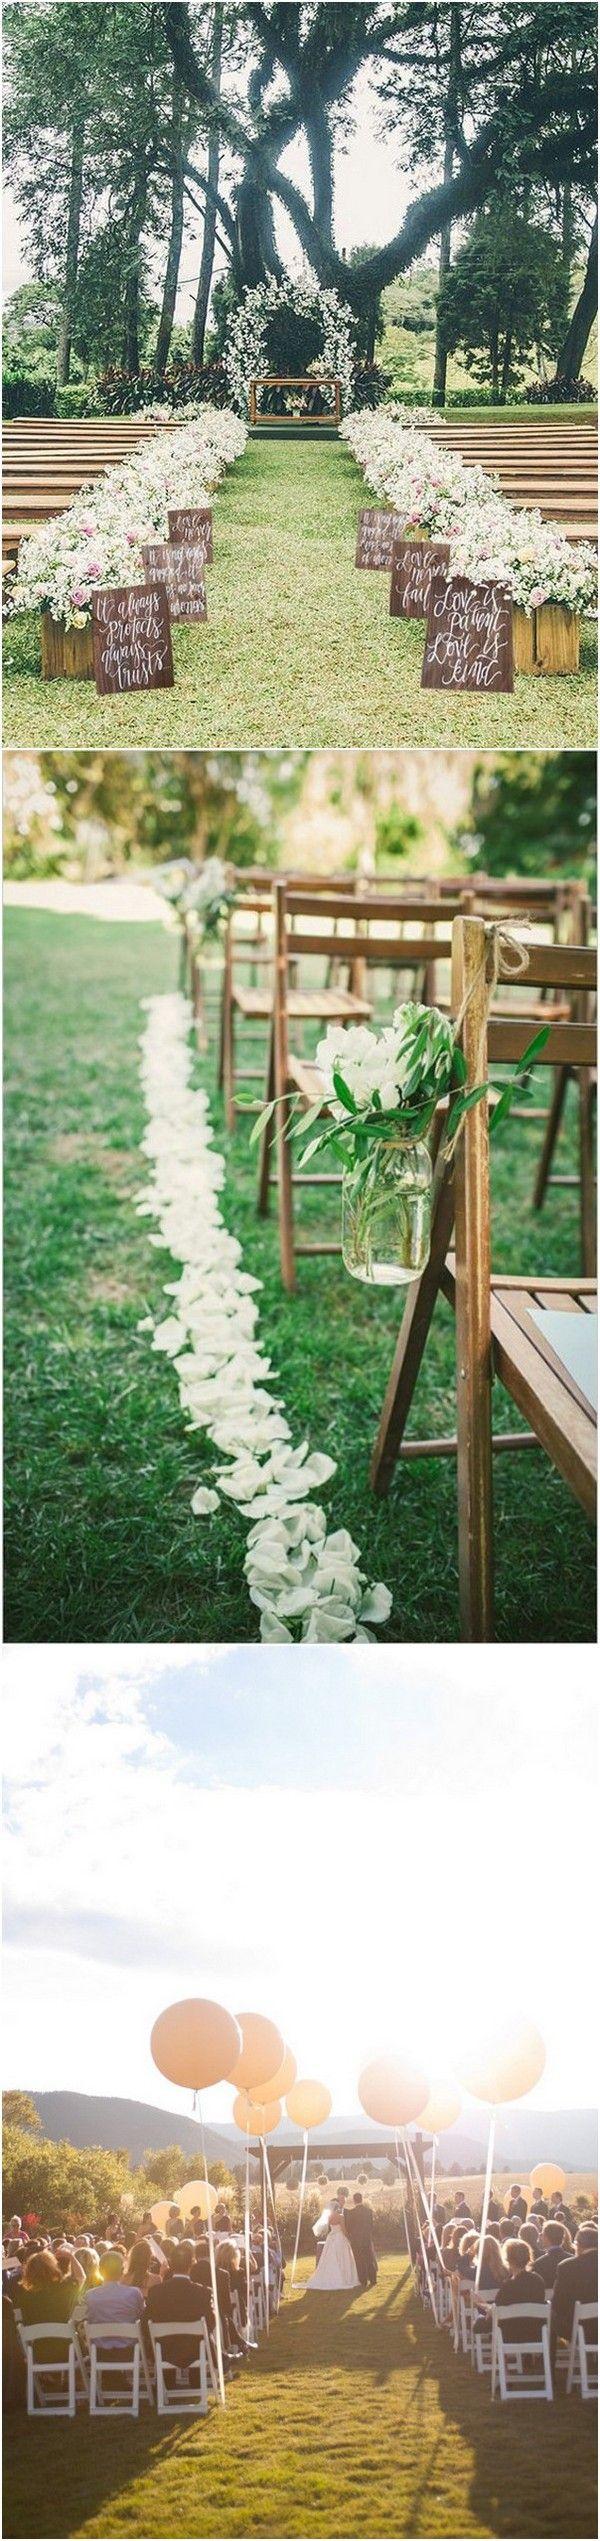 Wedding - 20 Breathtaking Wedding Aisle Decoration Ideas To Steal - Page 3 Of 3